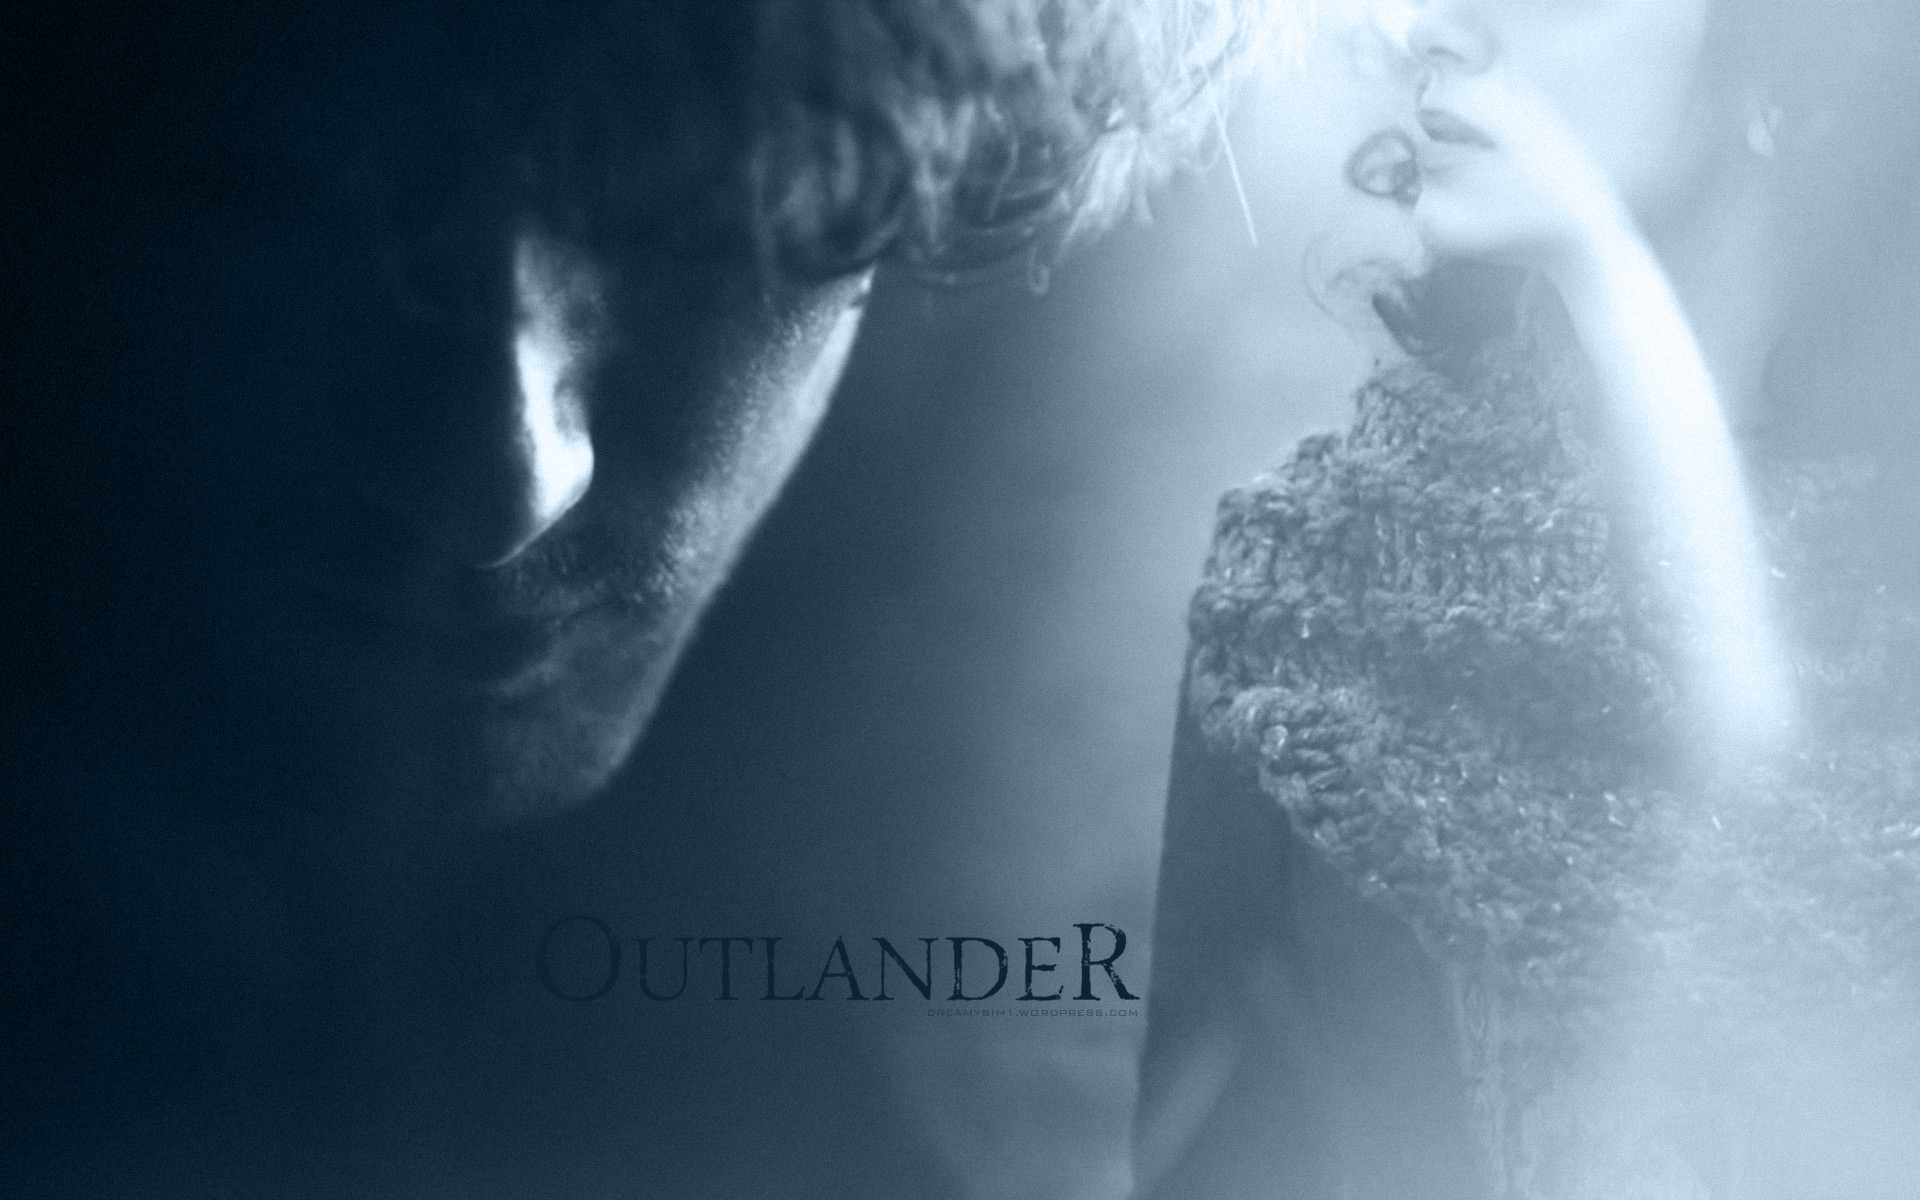 Looking For An Outlander Wallpaper We Ve Got You Covered HD Wallpapers Download Free Map Images Wallpaper [wallpaper376.blogspot.com]